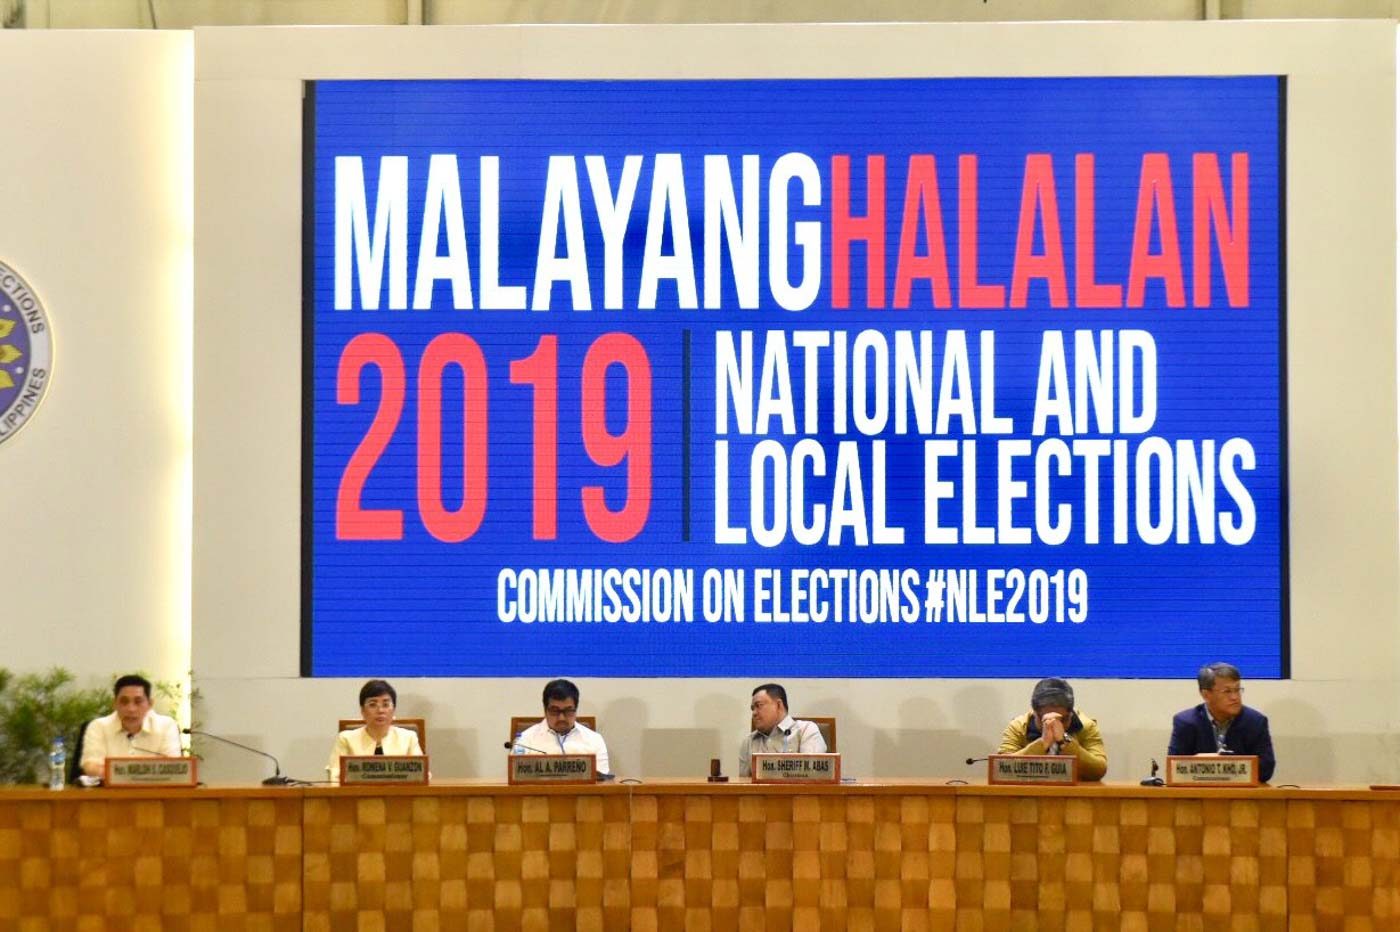 Comelec says 961 vote-counting machines defective